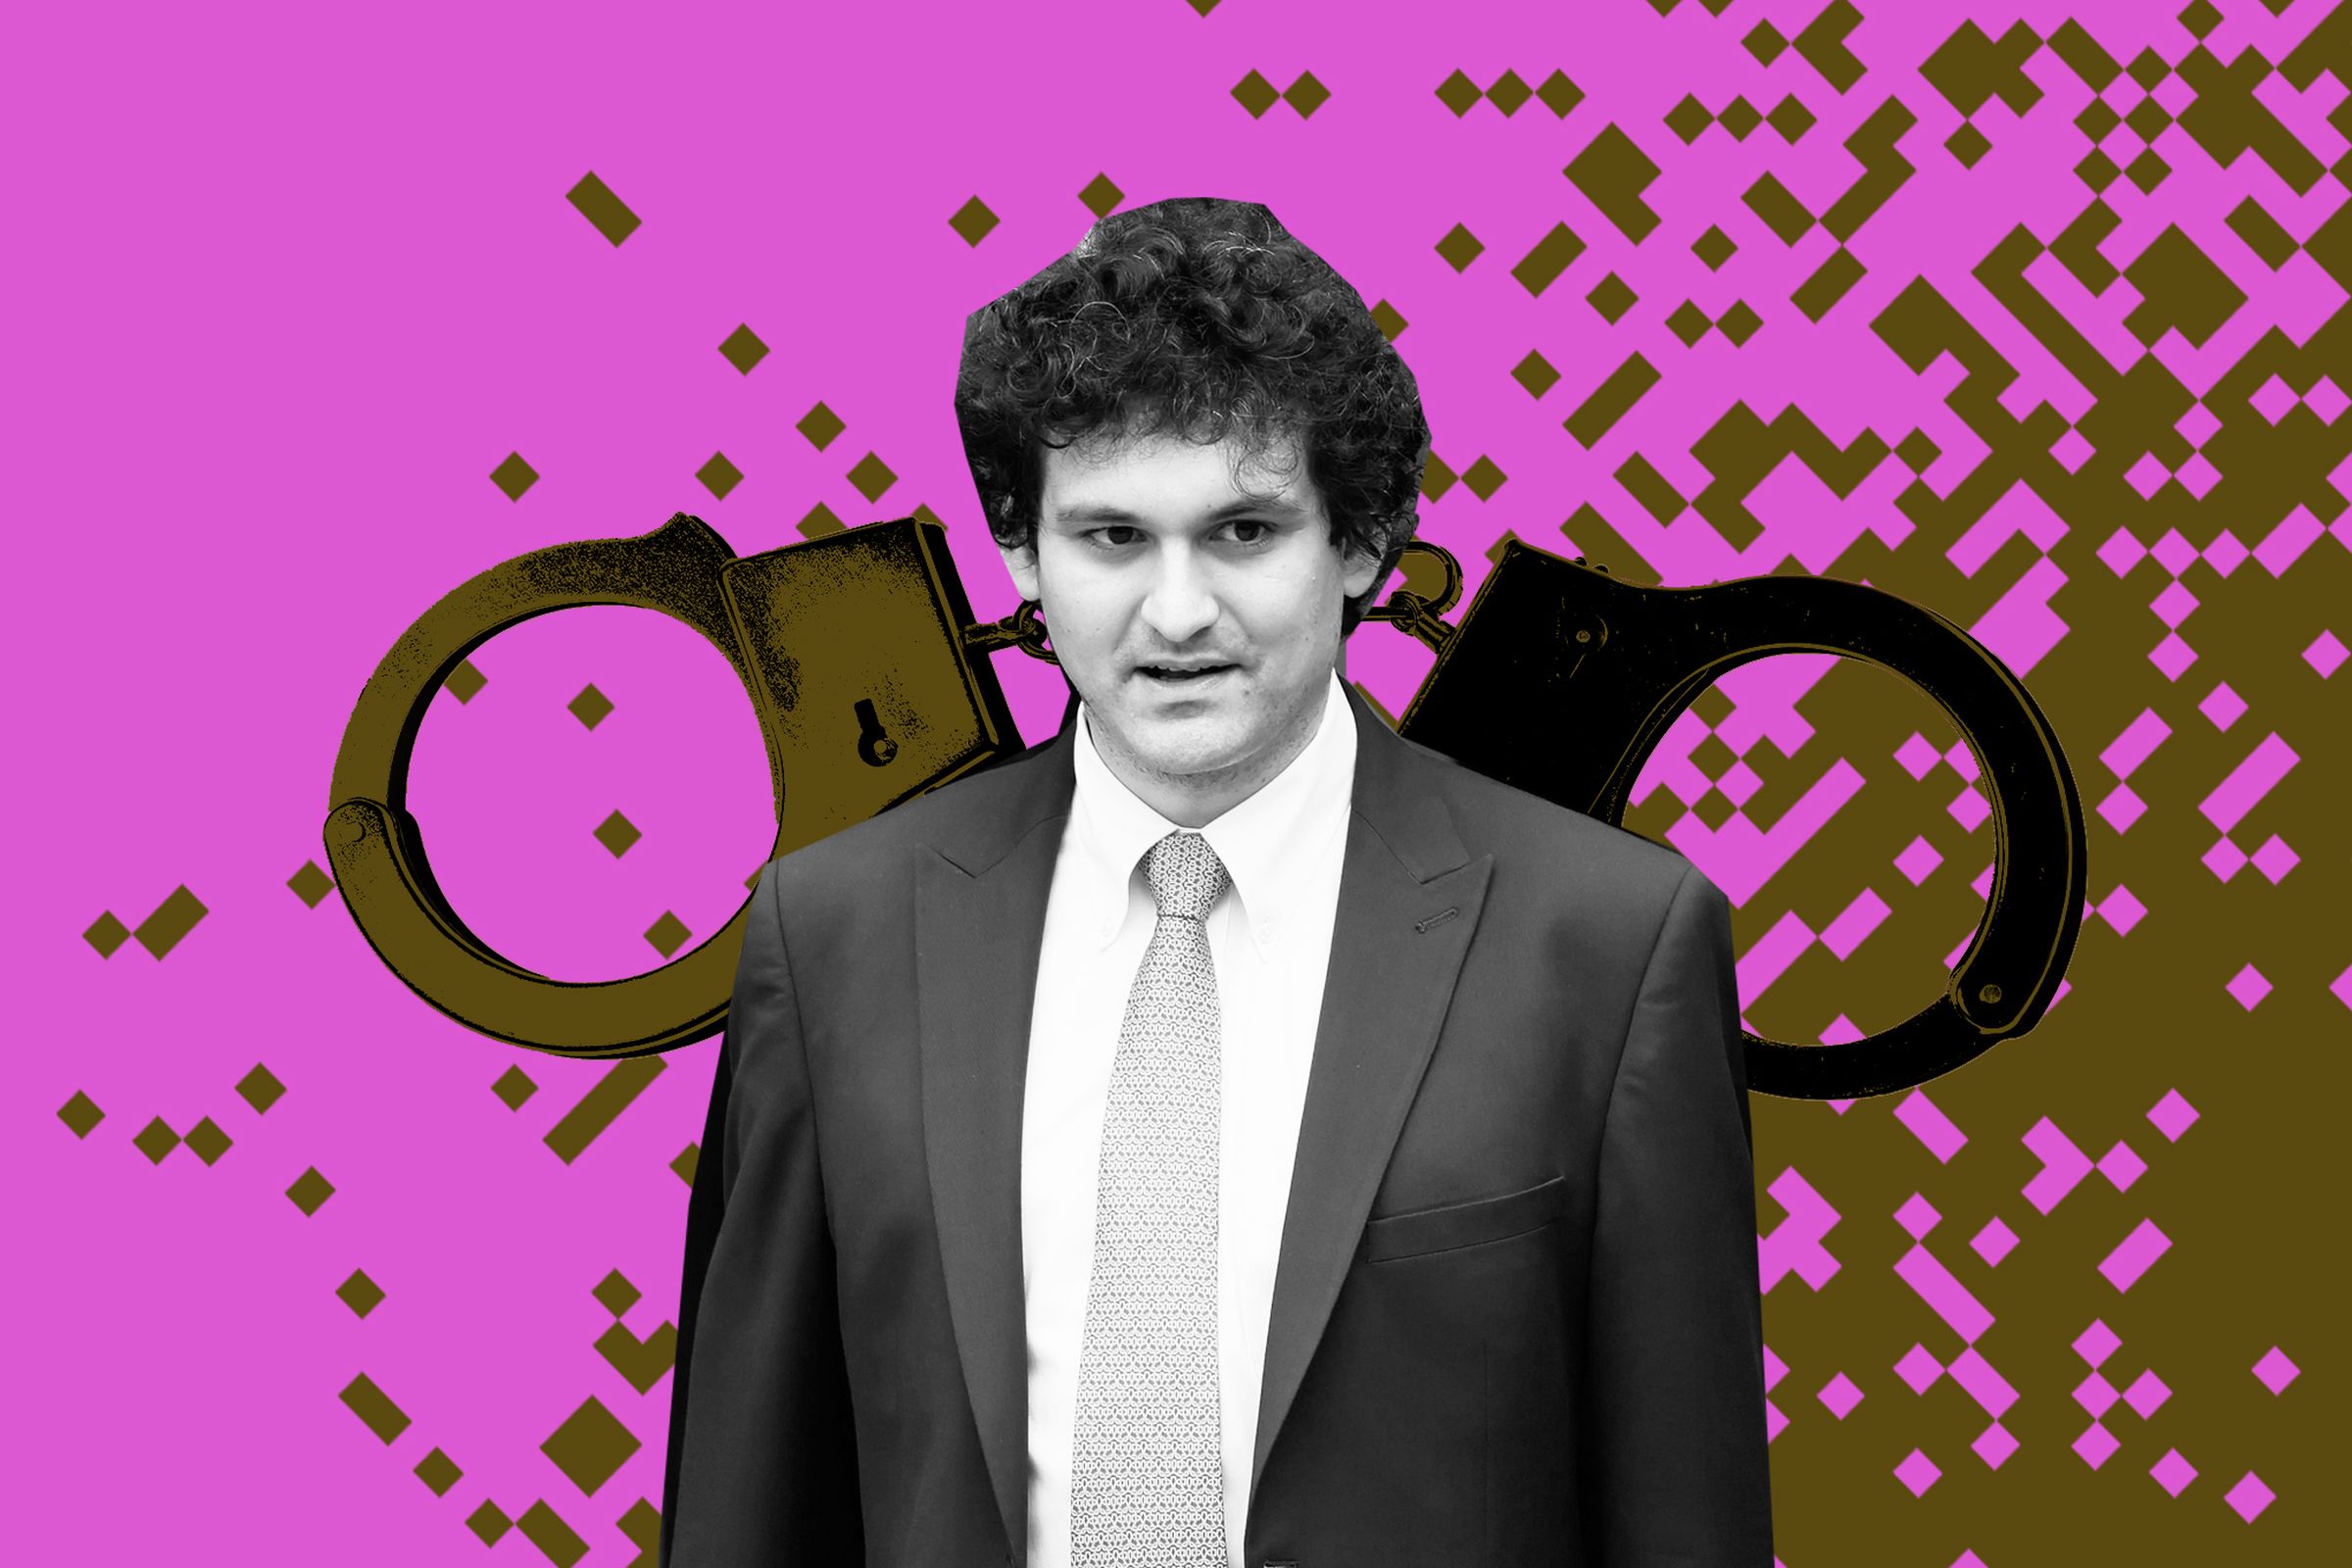 Photo illustration of Sam Bankman Fried on a background of pixels and handcuffs.